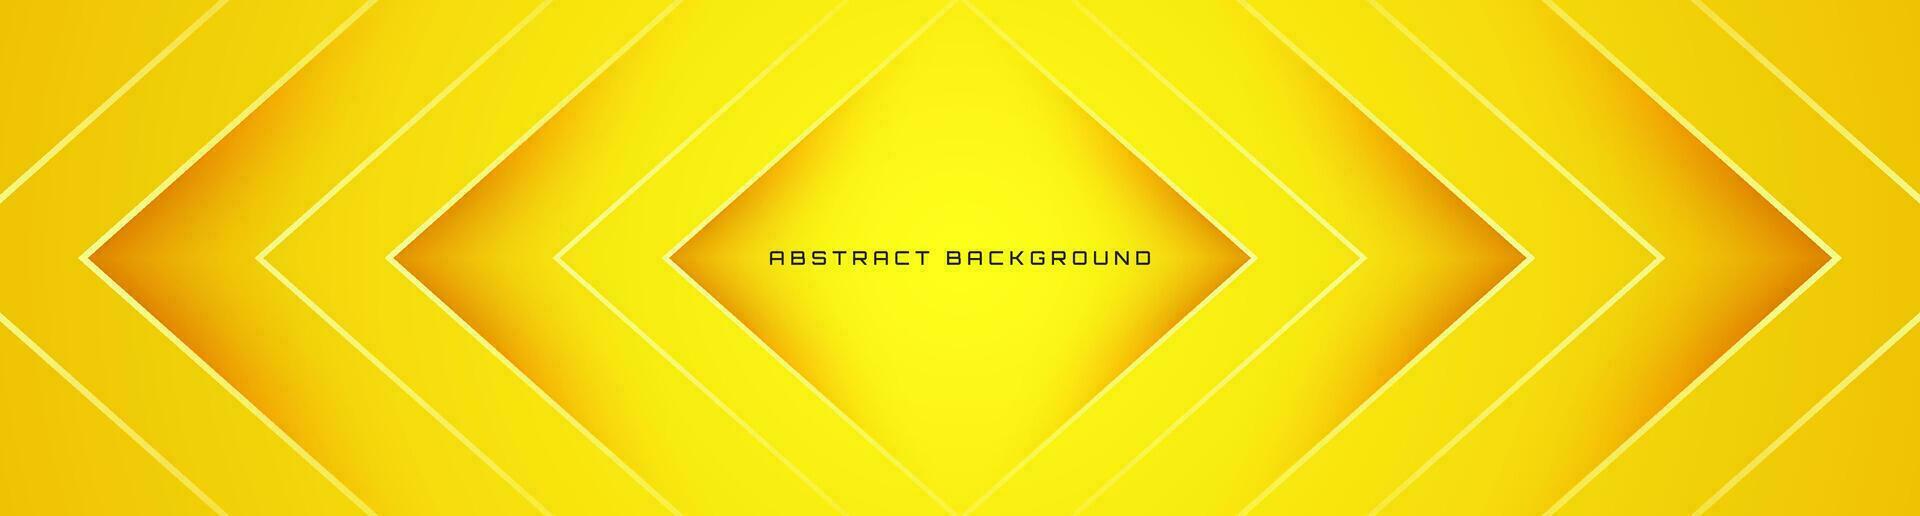 3D yellow geometric abstract background overlap layer on bright space with cutout effect decoration. Modern graphic design element minimal style concept for banner, flyer, card, cover, or brochure vector